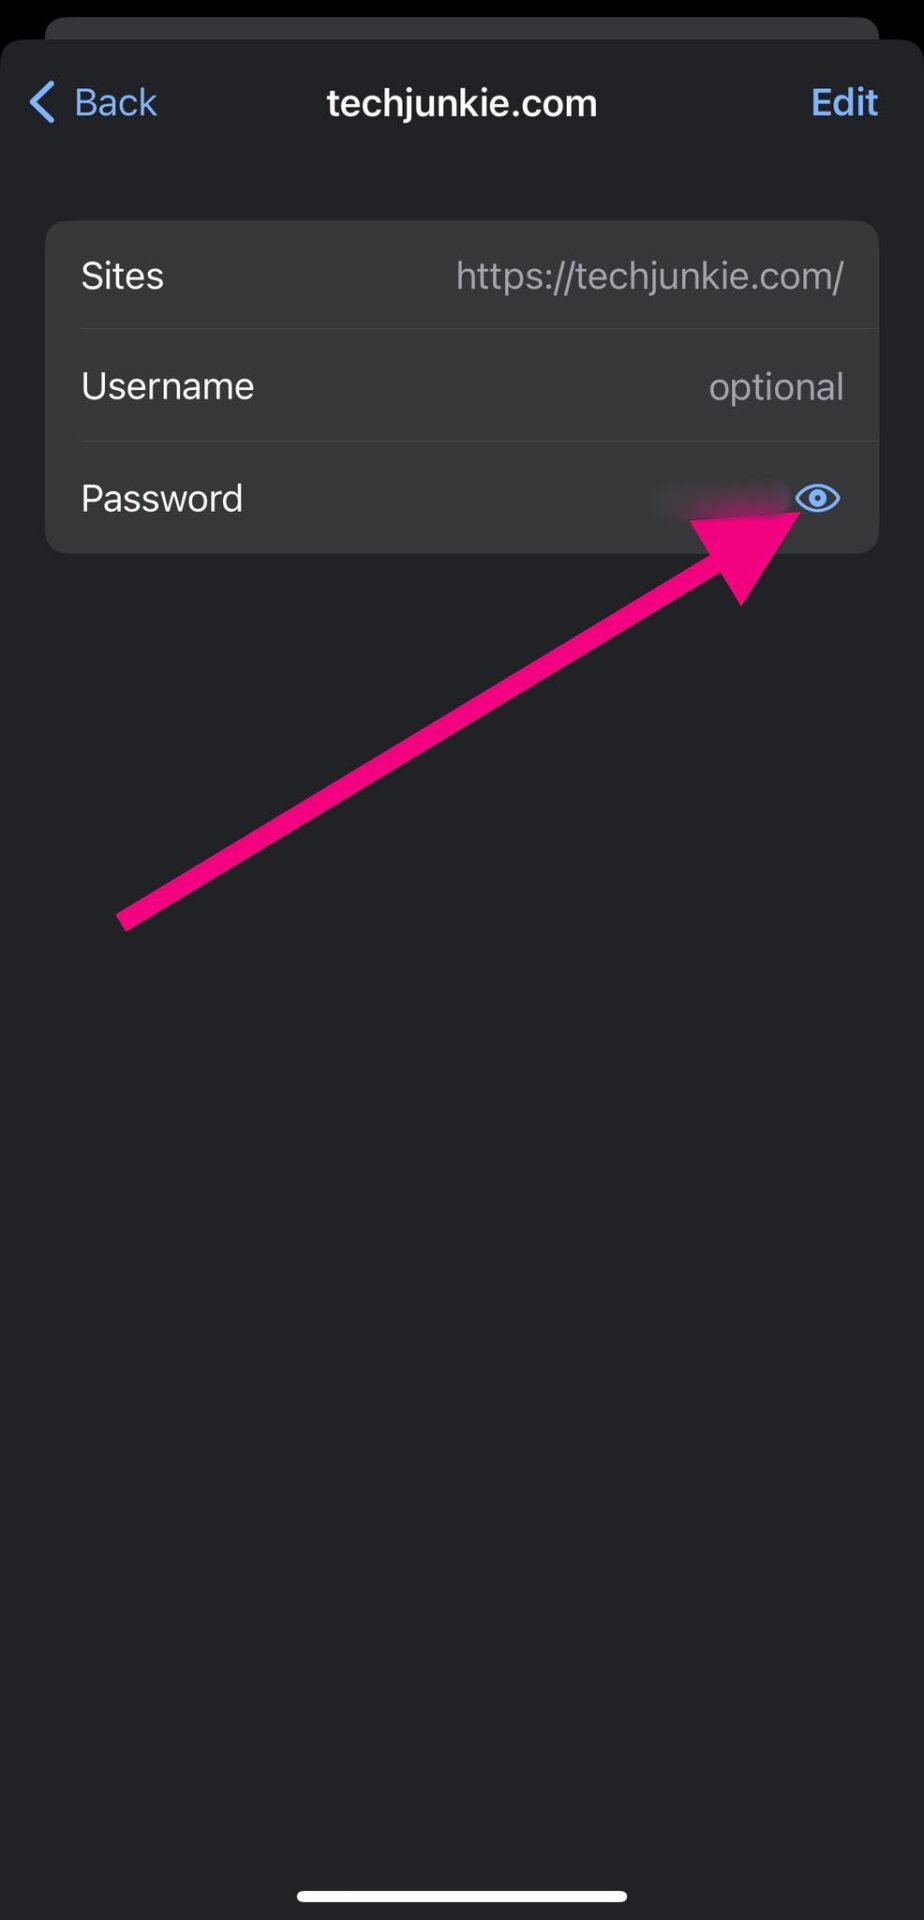 google chrome for iPhone - showing eye icon for password reveal